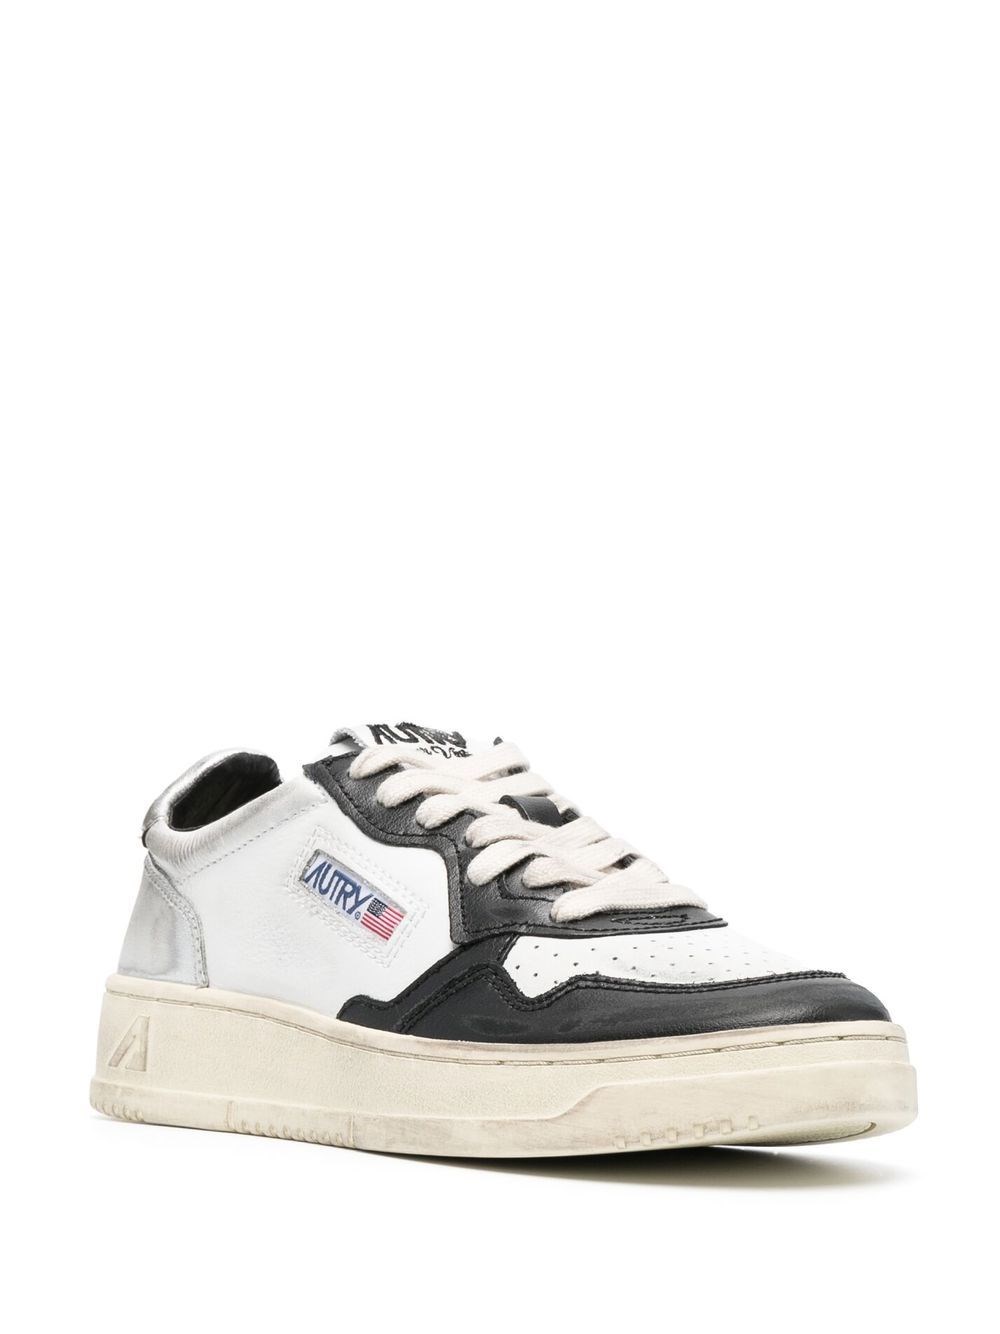 autry AVLW/SV11 WHT/BLK/SIL available on montiboutique.com - 52859